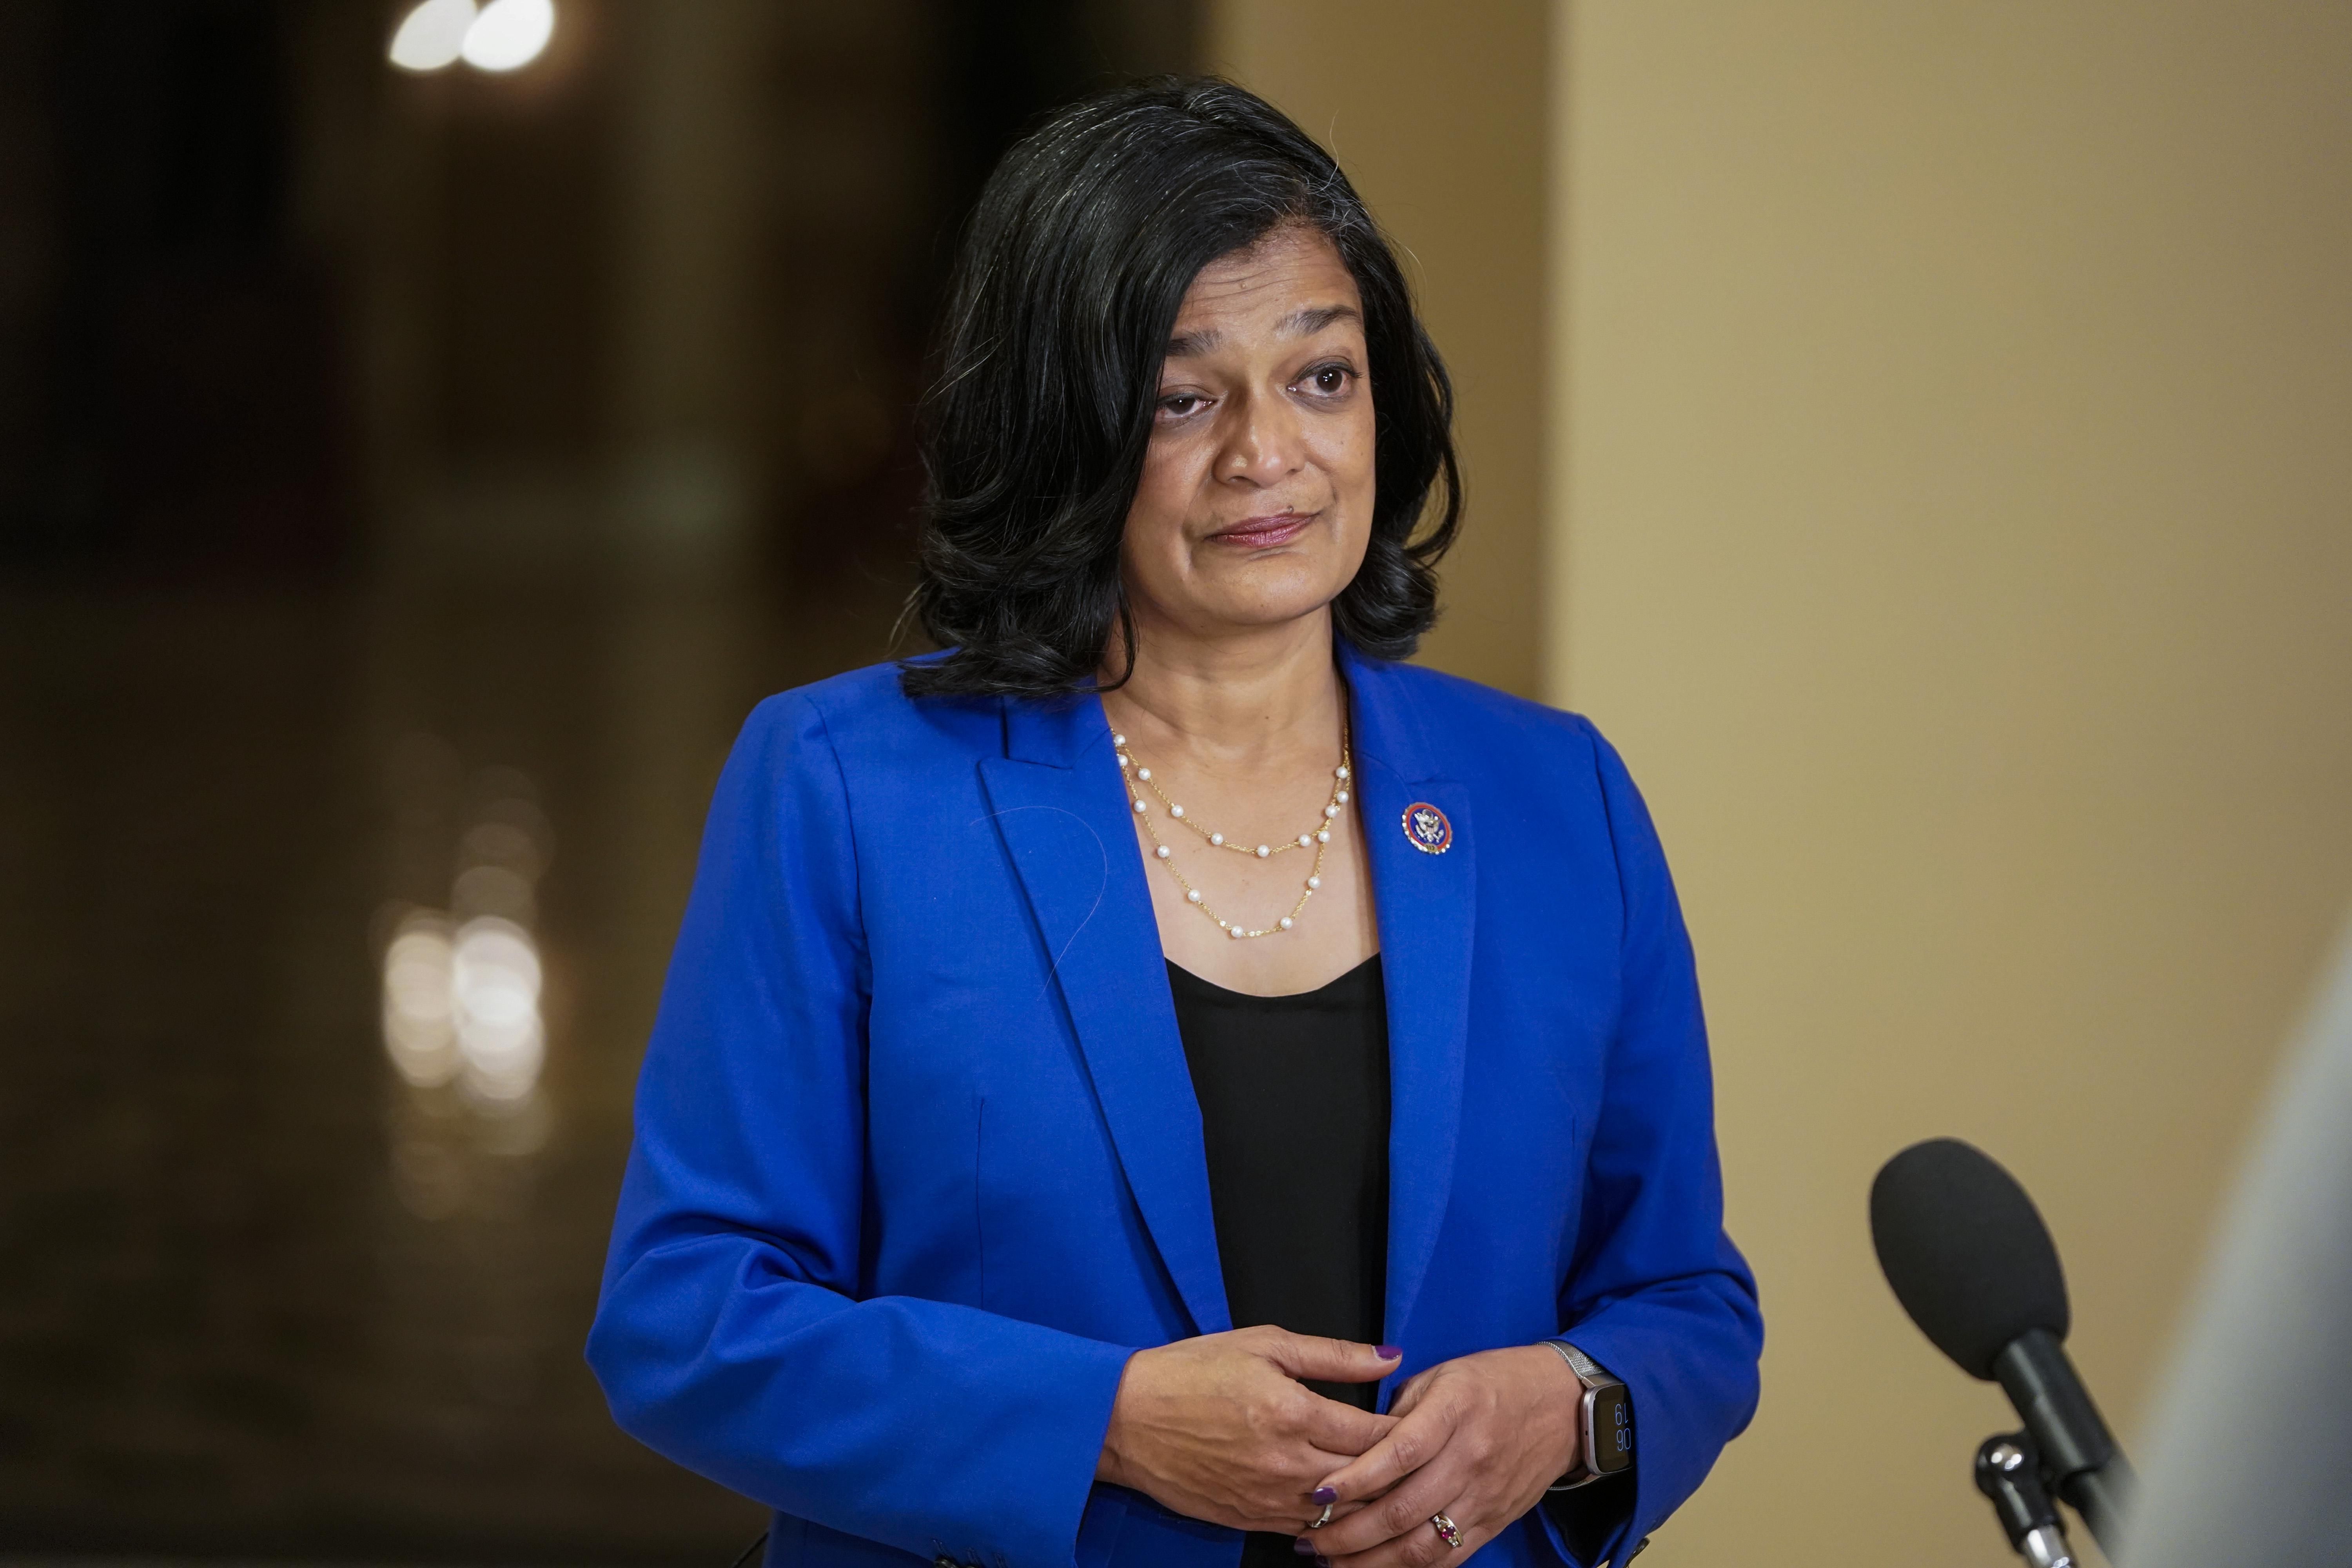 Rep. Pramila Jayapal (D-Wash.) speaks during an interview as House Democrats work on infrastructure and spending bills on Capitol Hill on November 4, 2021 in Washington, D.C. (Photo: Joshua Roberts via Getty Images)